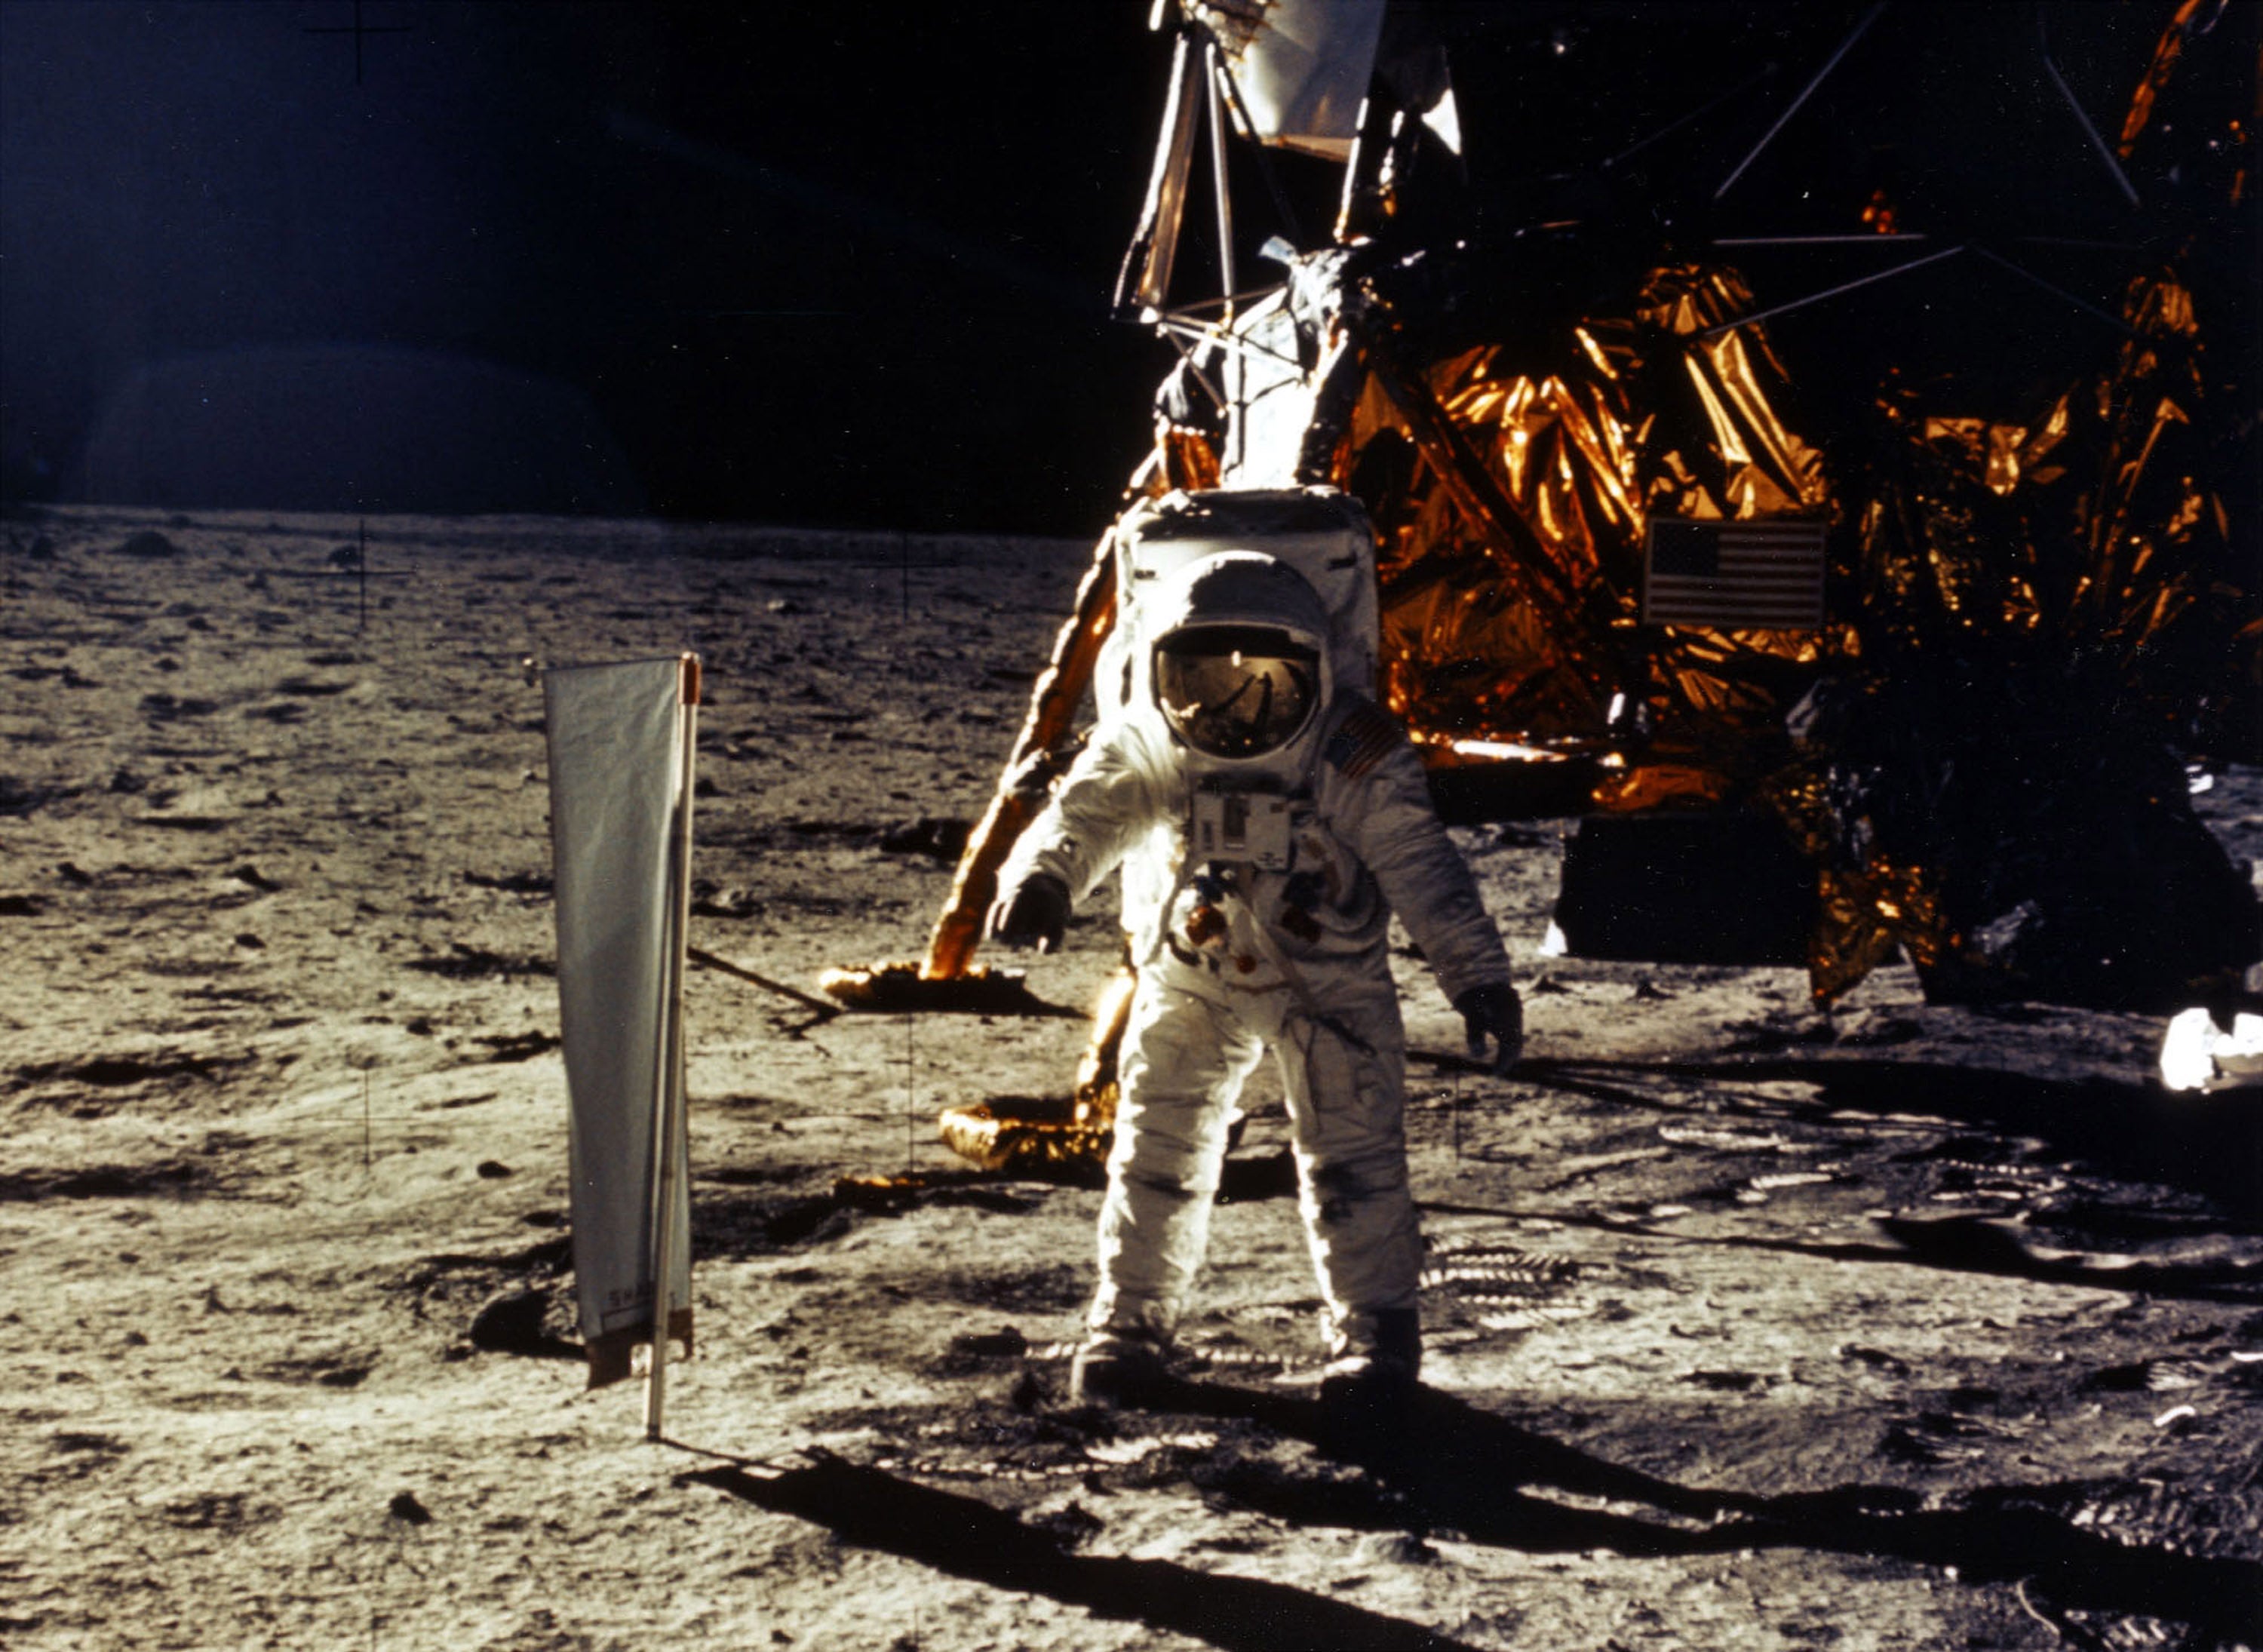 Buzz Aldrin is photographed by Neil Armstrong during the first moon landing in 1969